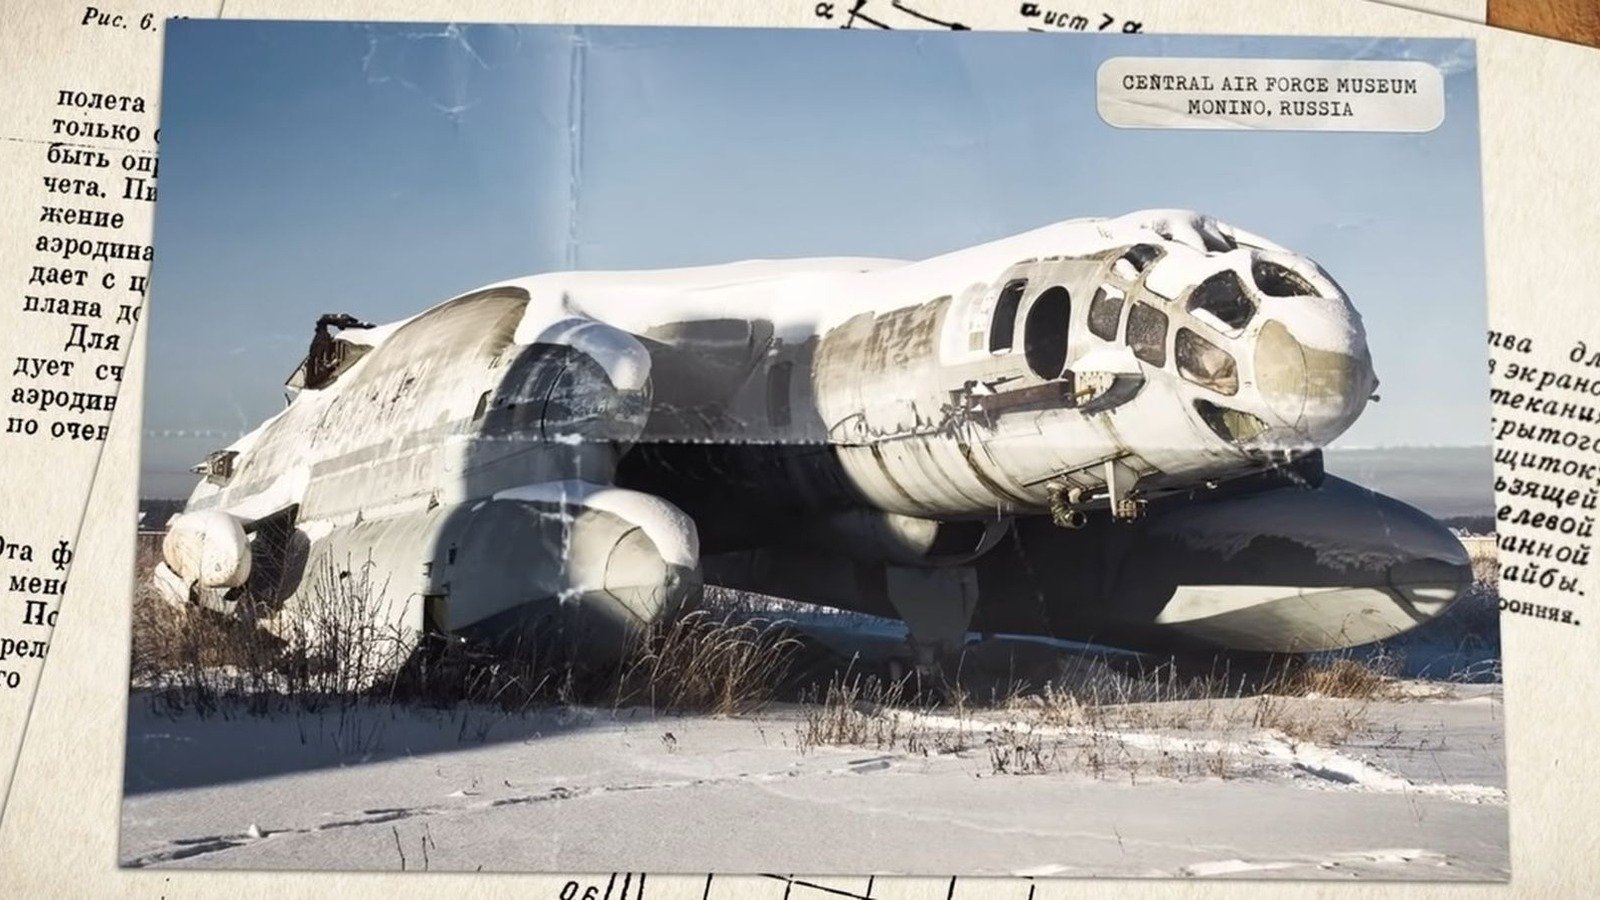 The Strange Soviet Aircraft That Could Land Almost Anywhere